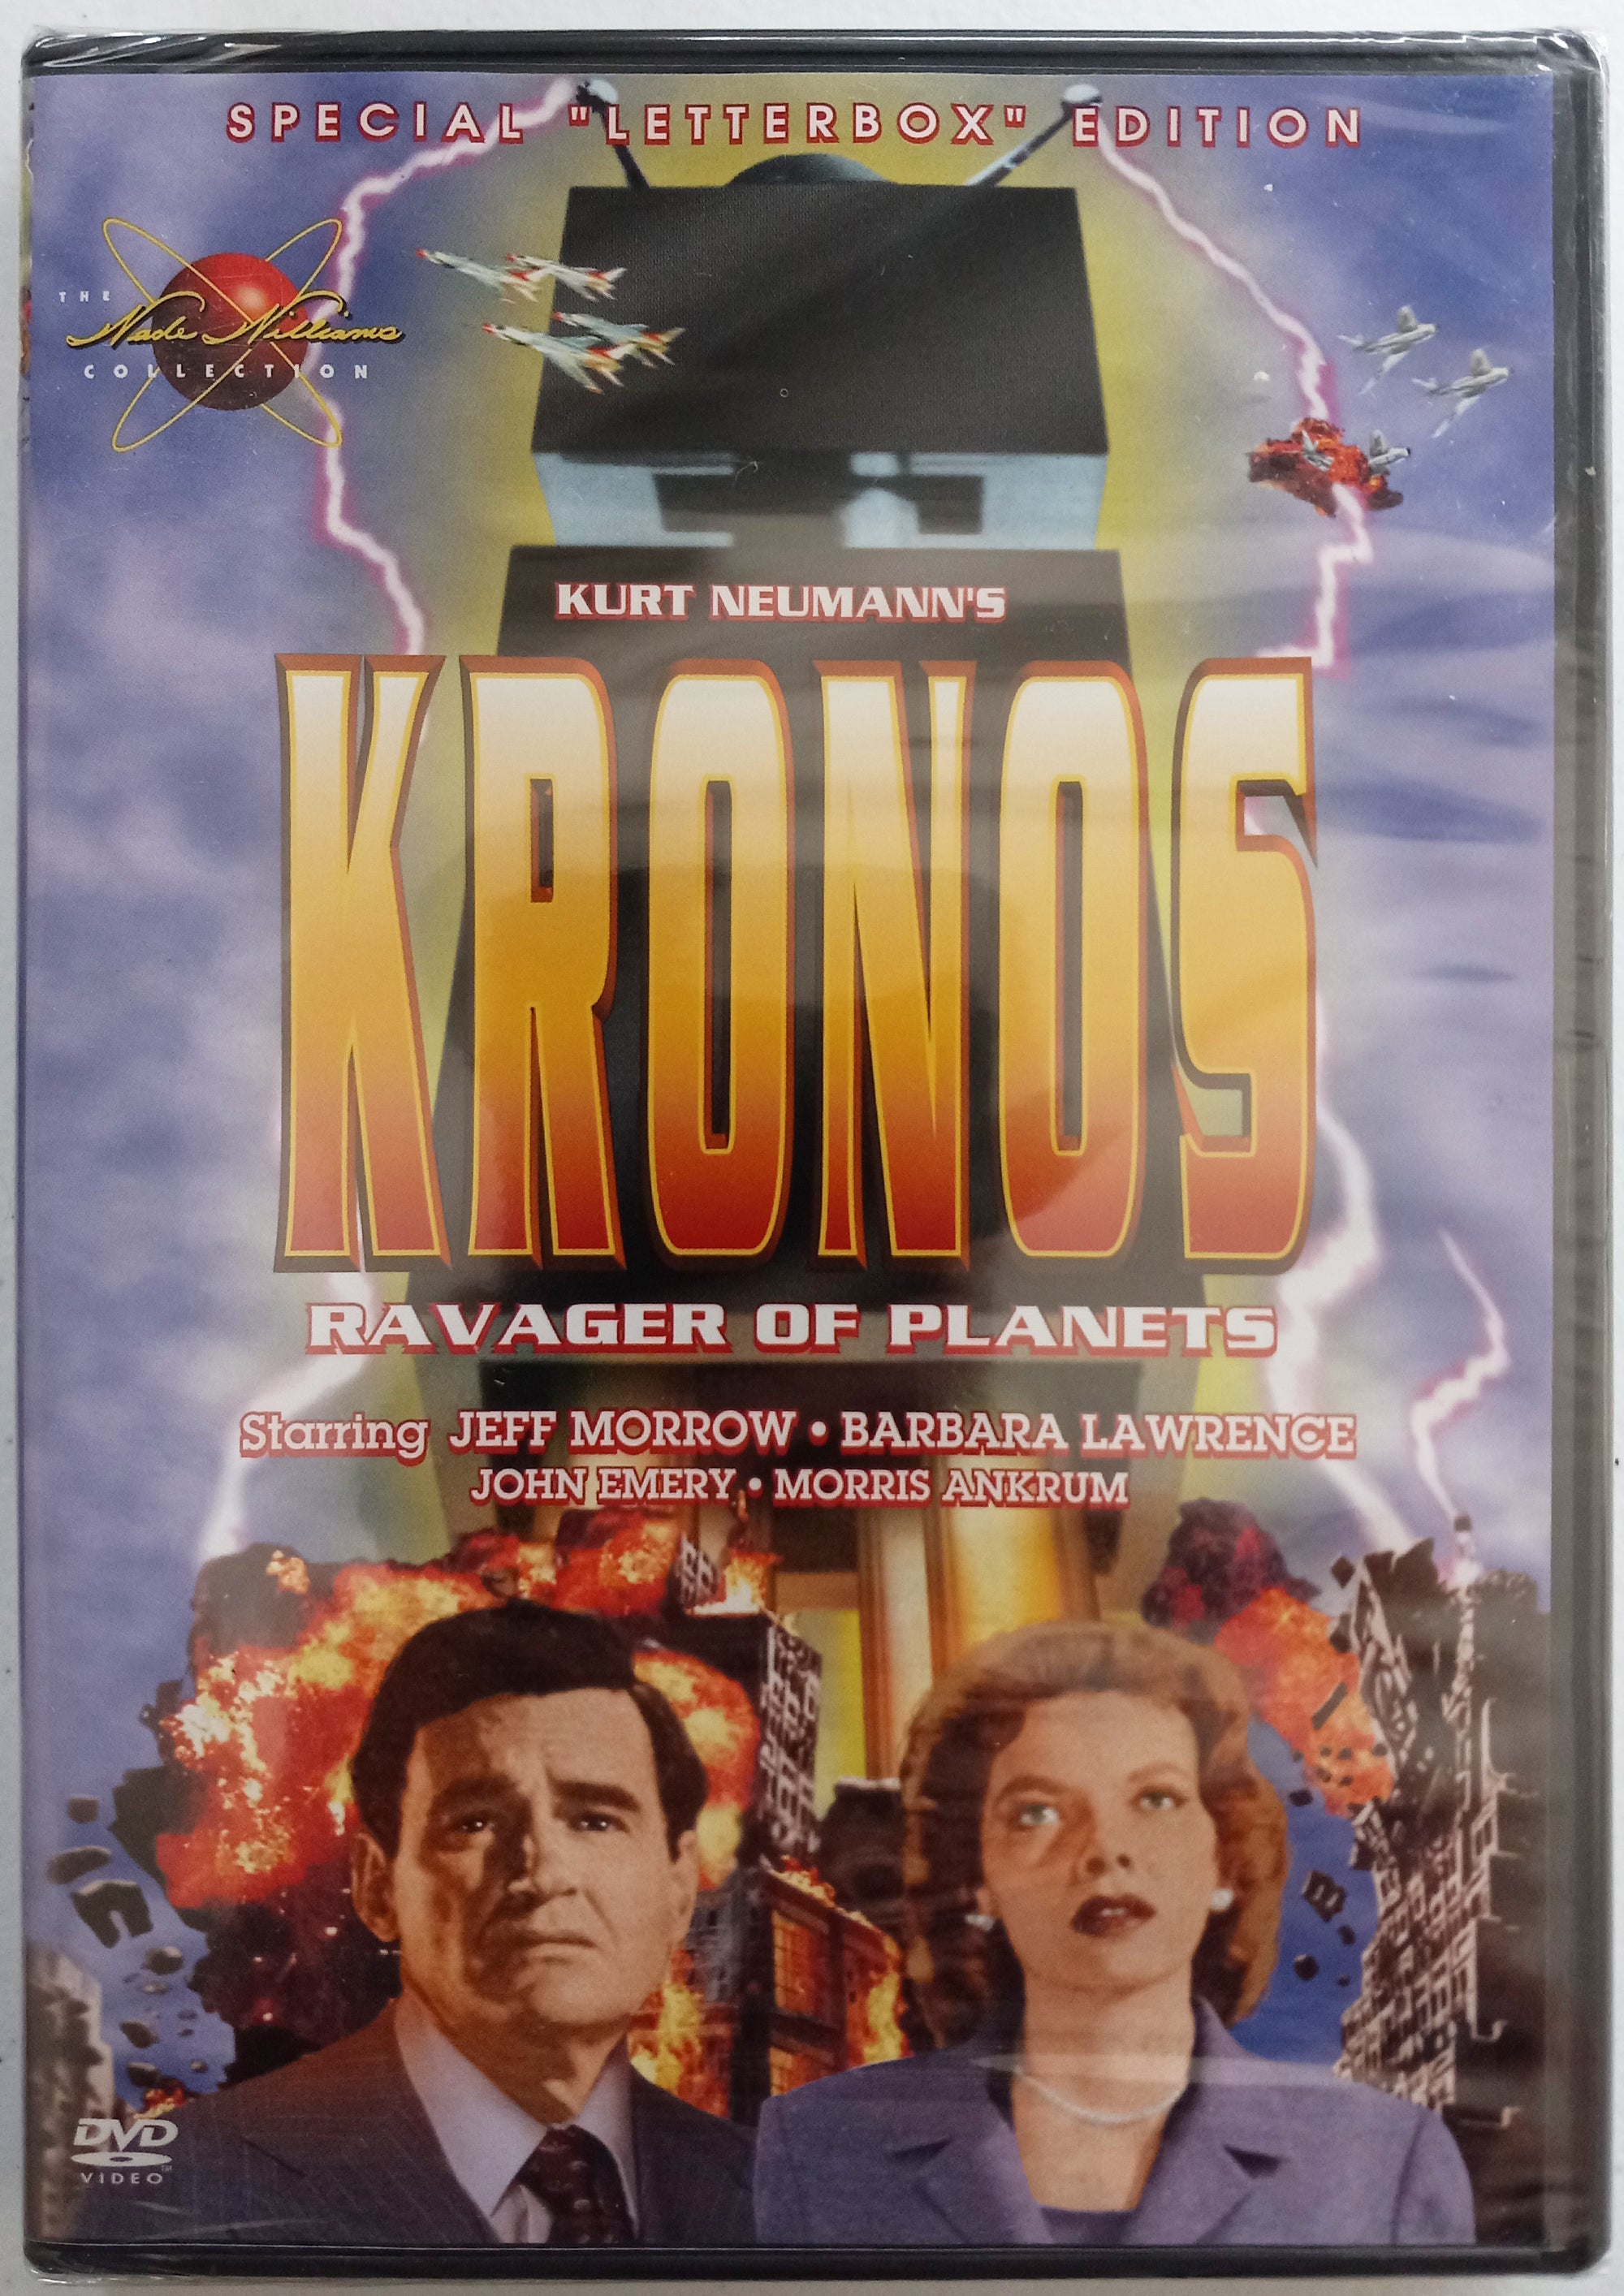 Kronos-Ravager-Of-Planets-DVD